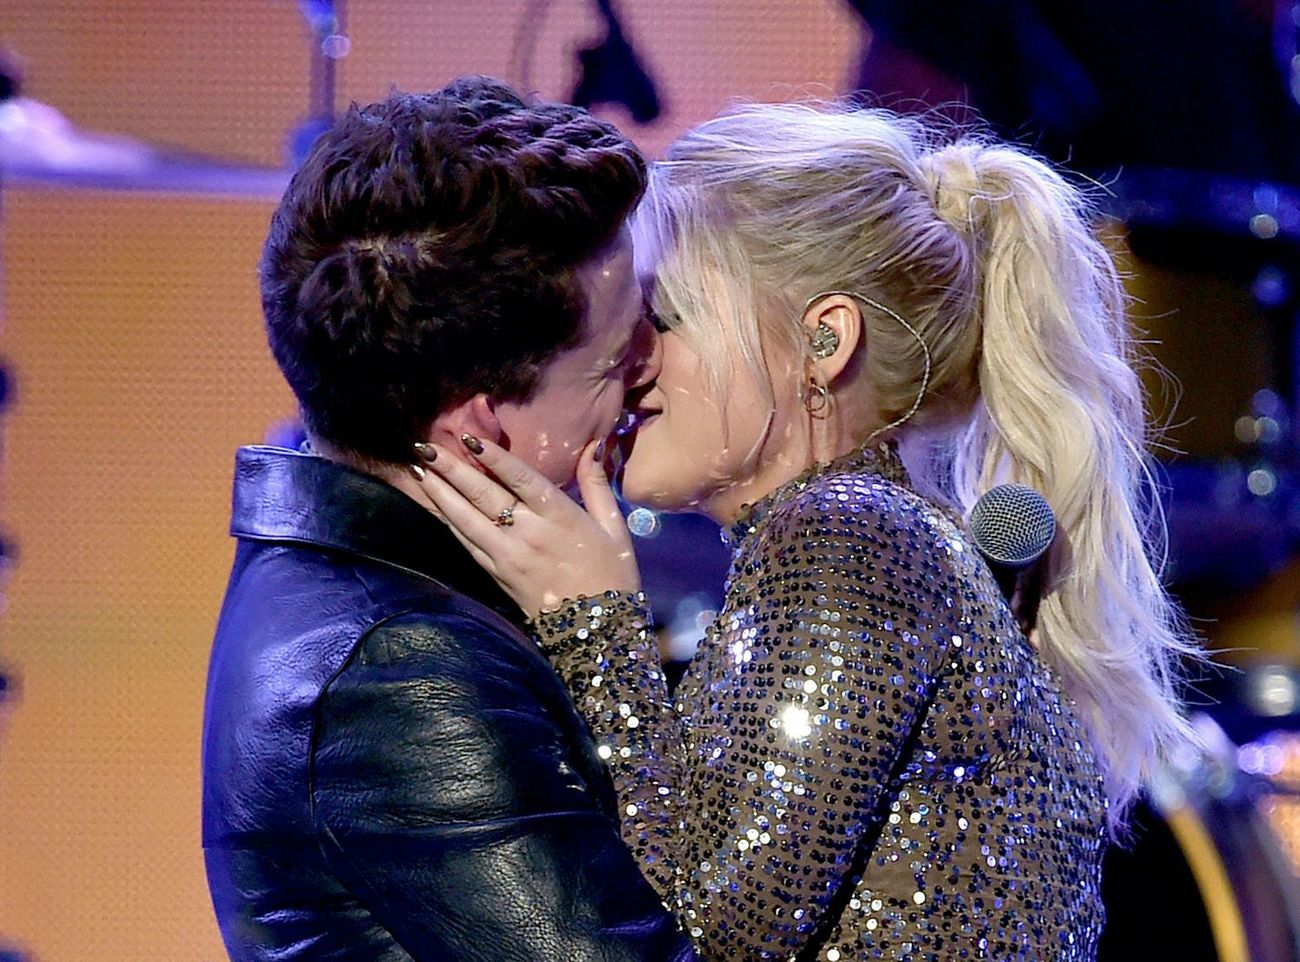 Who Was Kissing At The American Music Awards